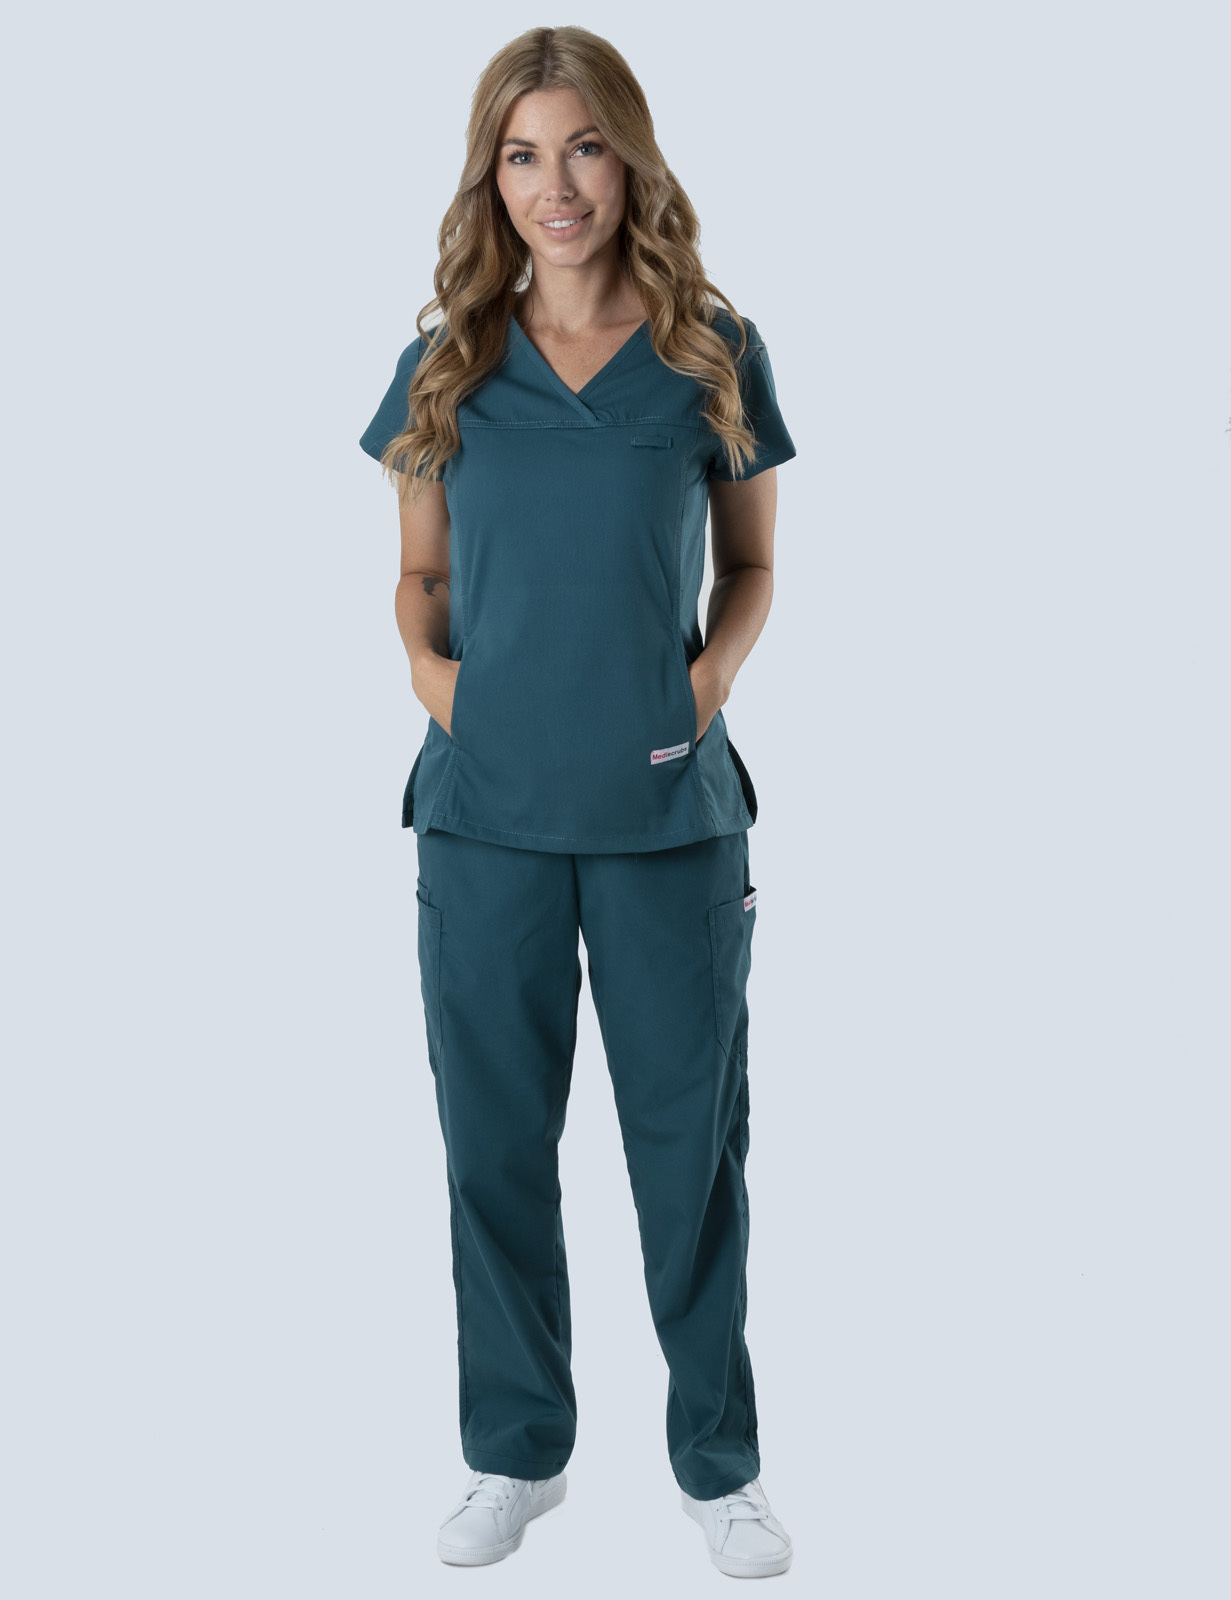 Rockhampton Base Hospital - ED RN (Women's Fit Solid Scrub Top and Cargo Pants in Caribbean incl Logos)